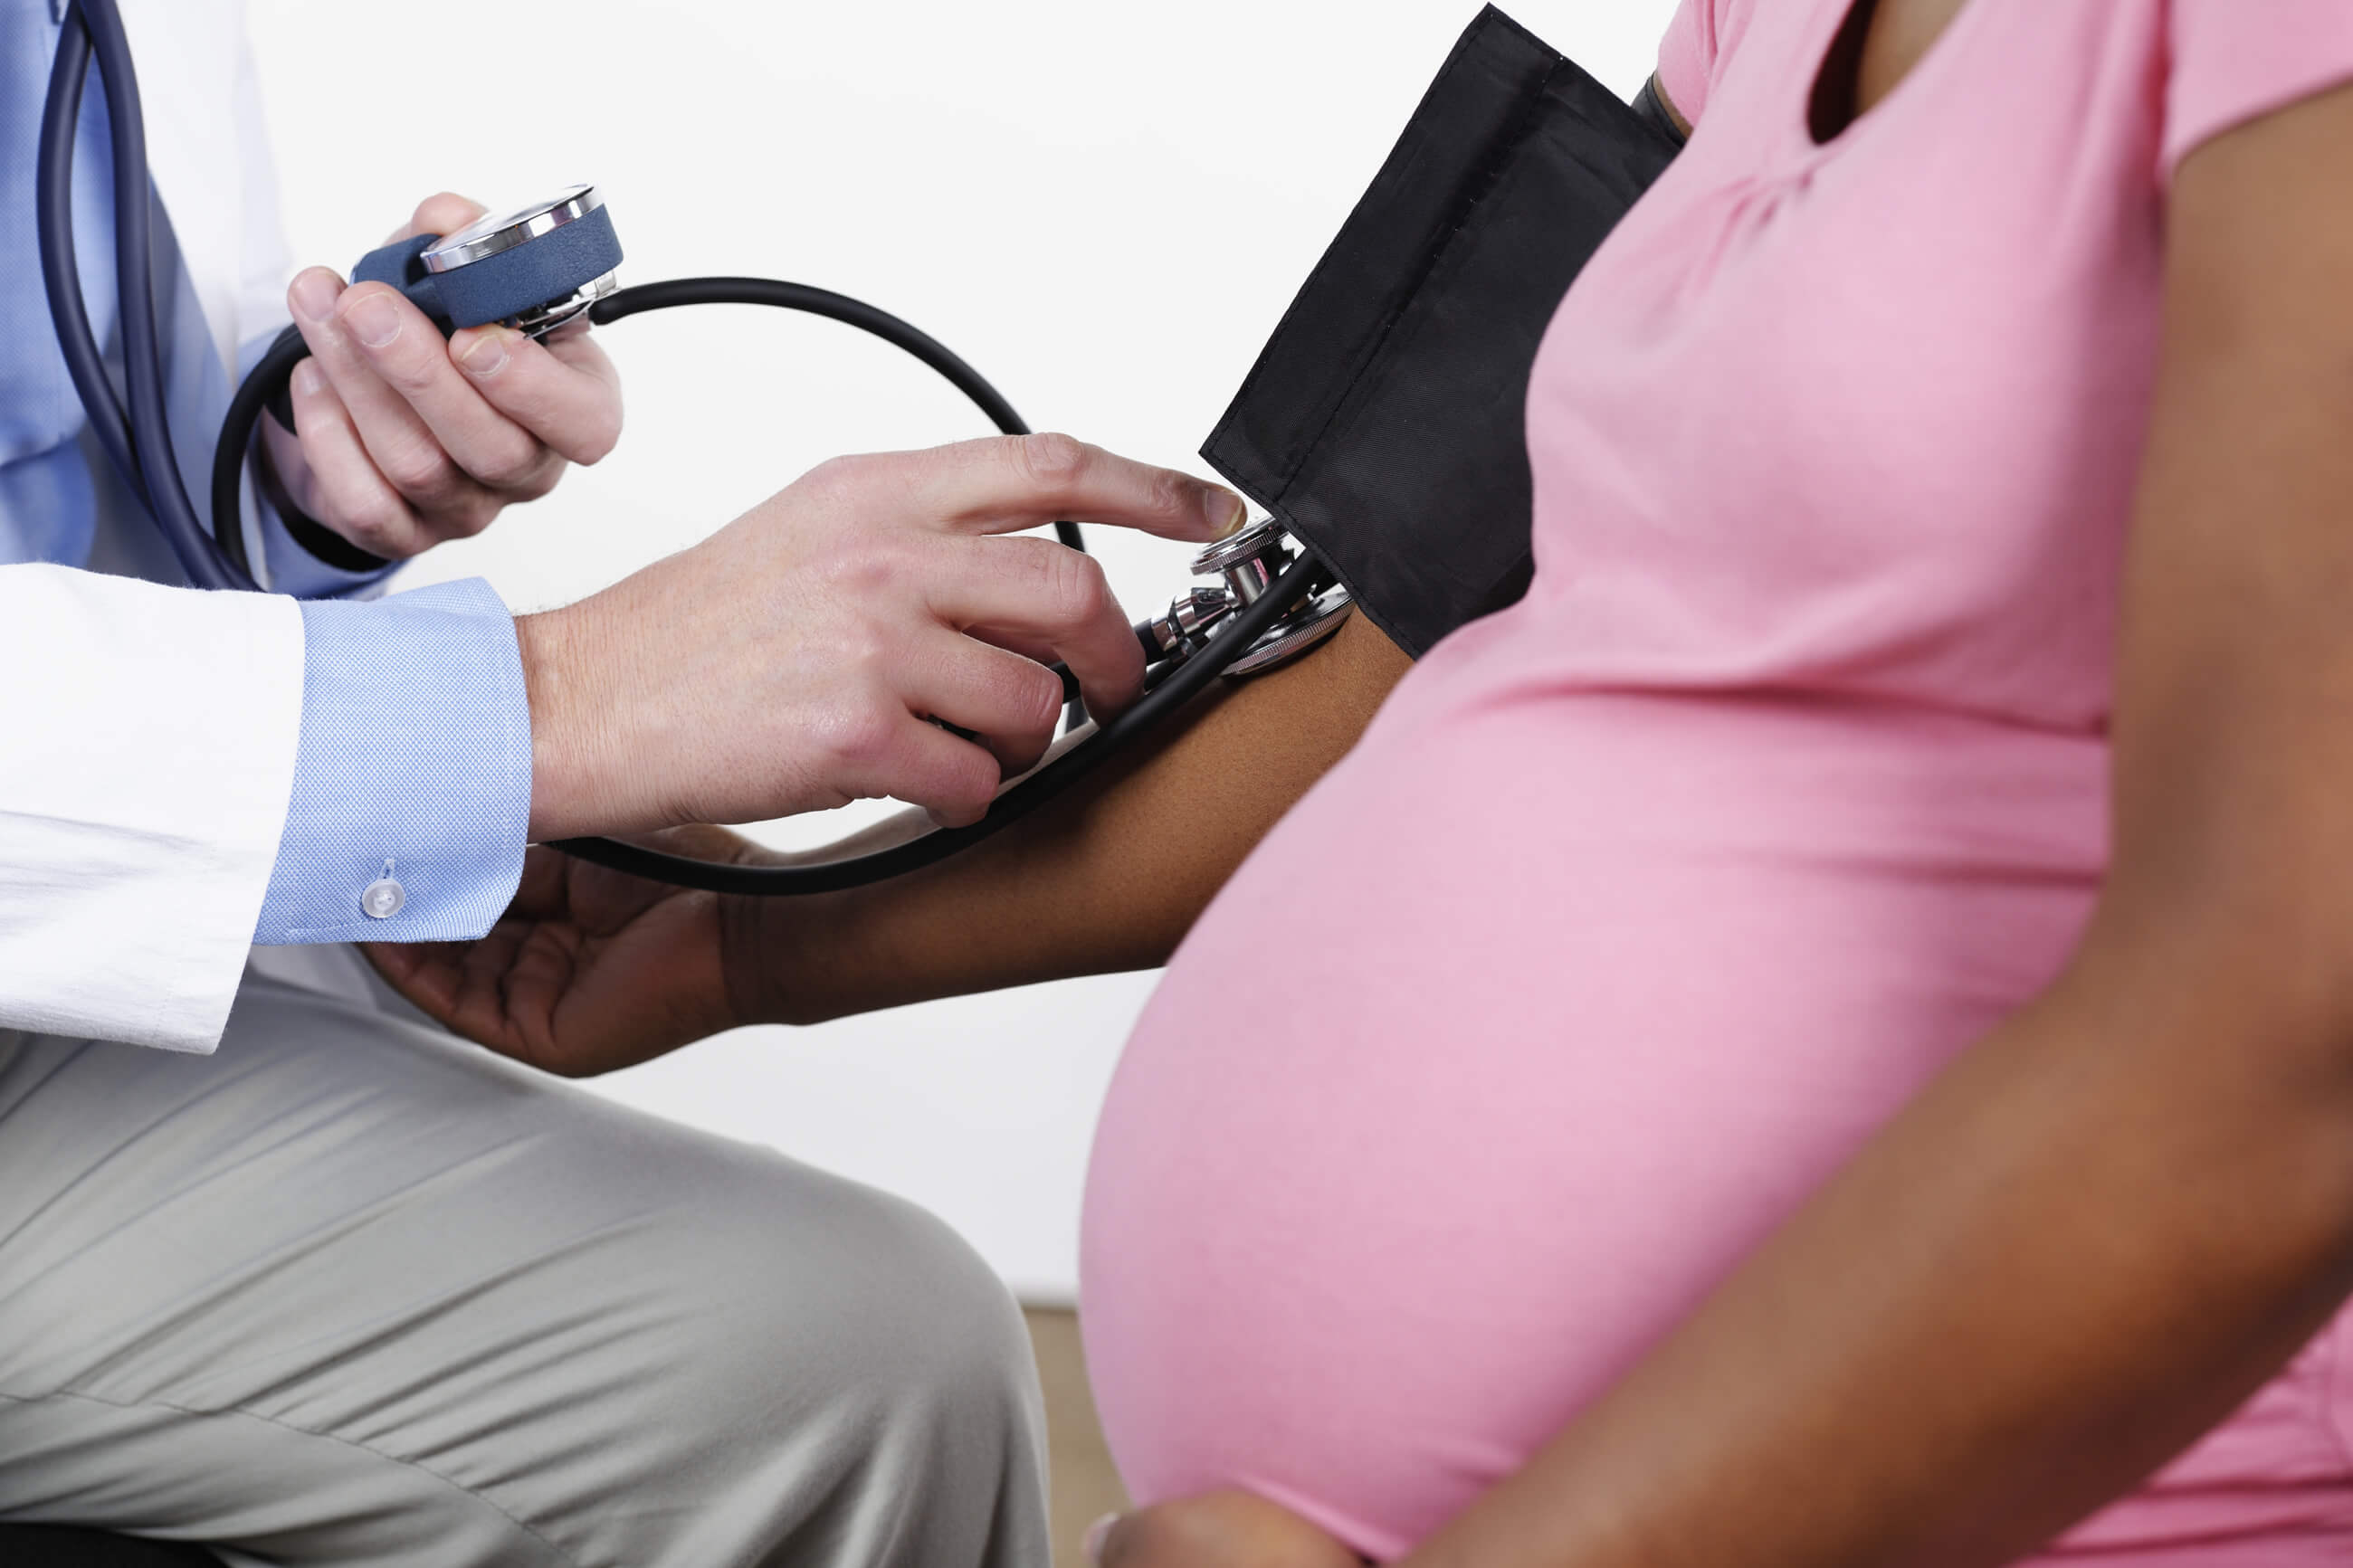 Preeclampsia and High Blood Pressure During Pregnancy